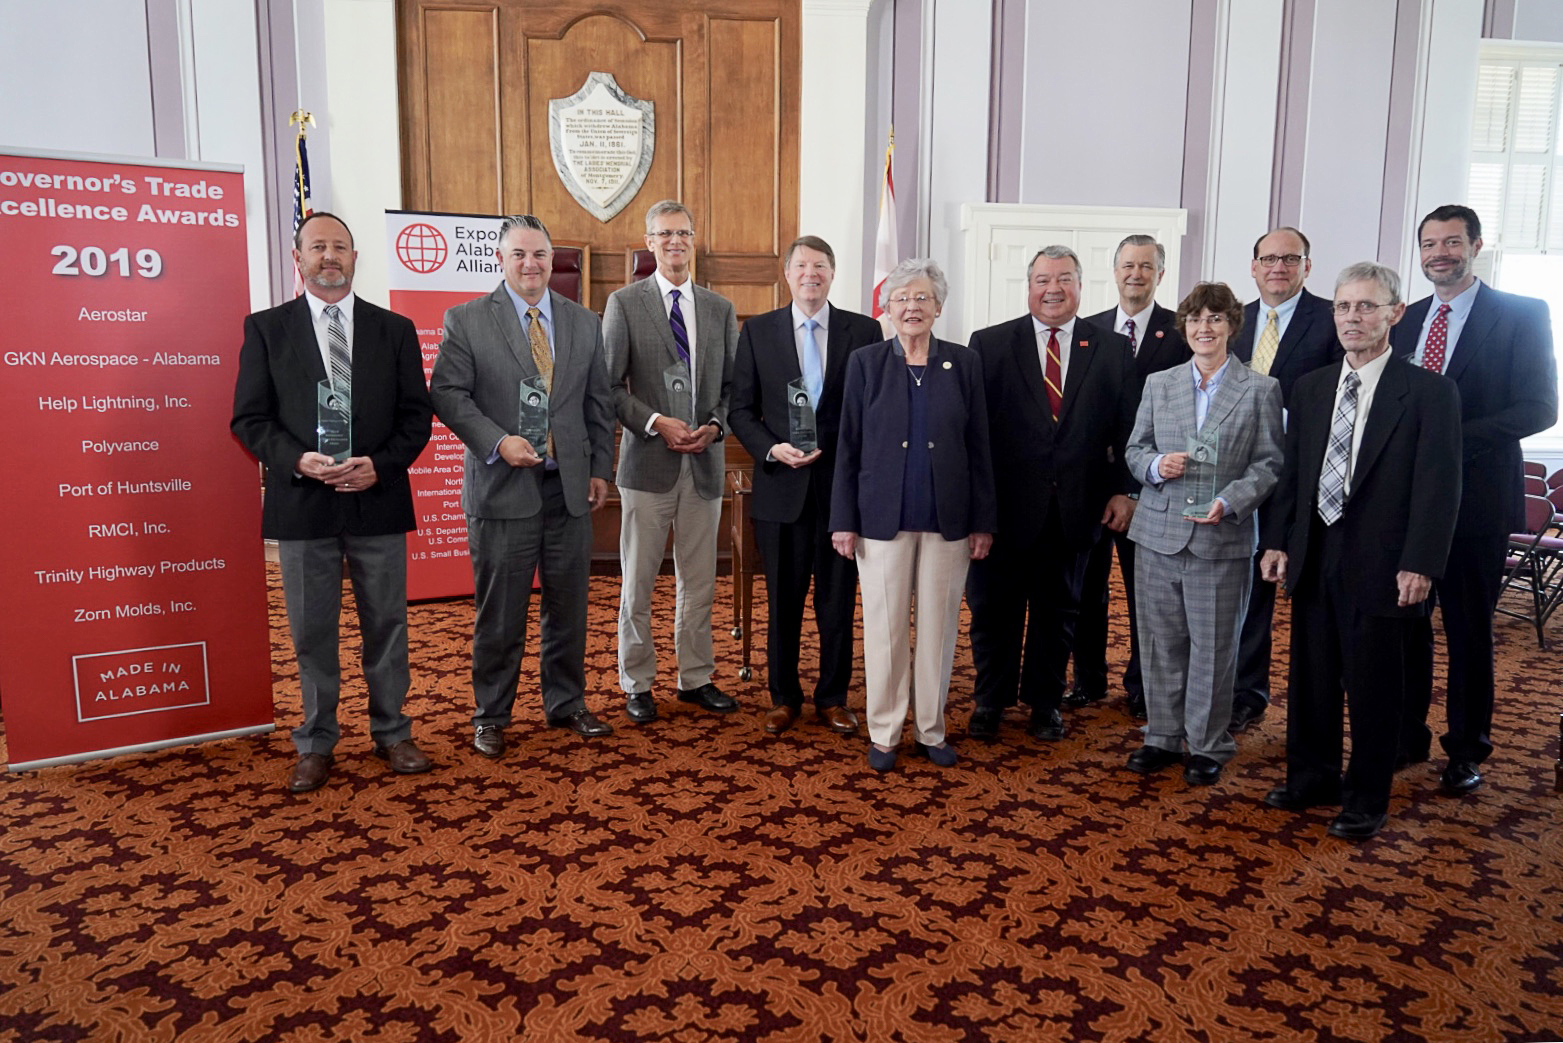 Governor Ivey Honors Eight Winners with 2019 Trade Excellence Awards